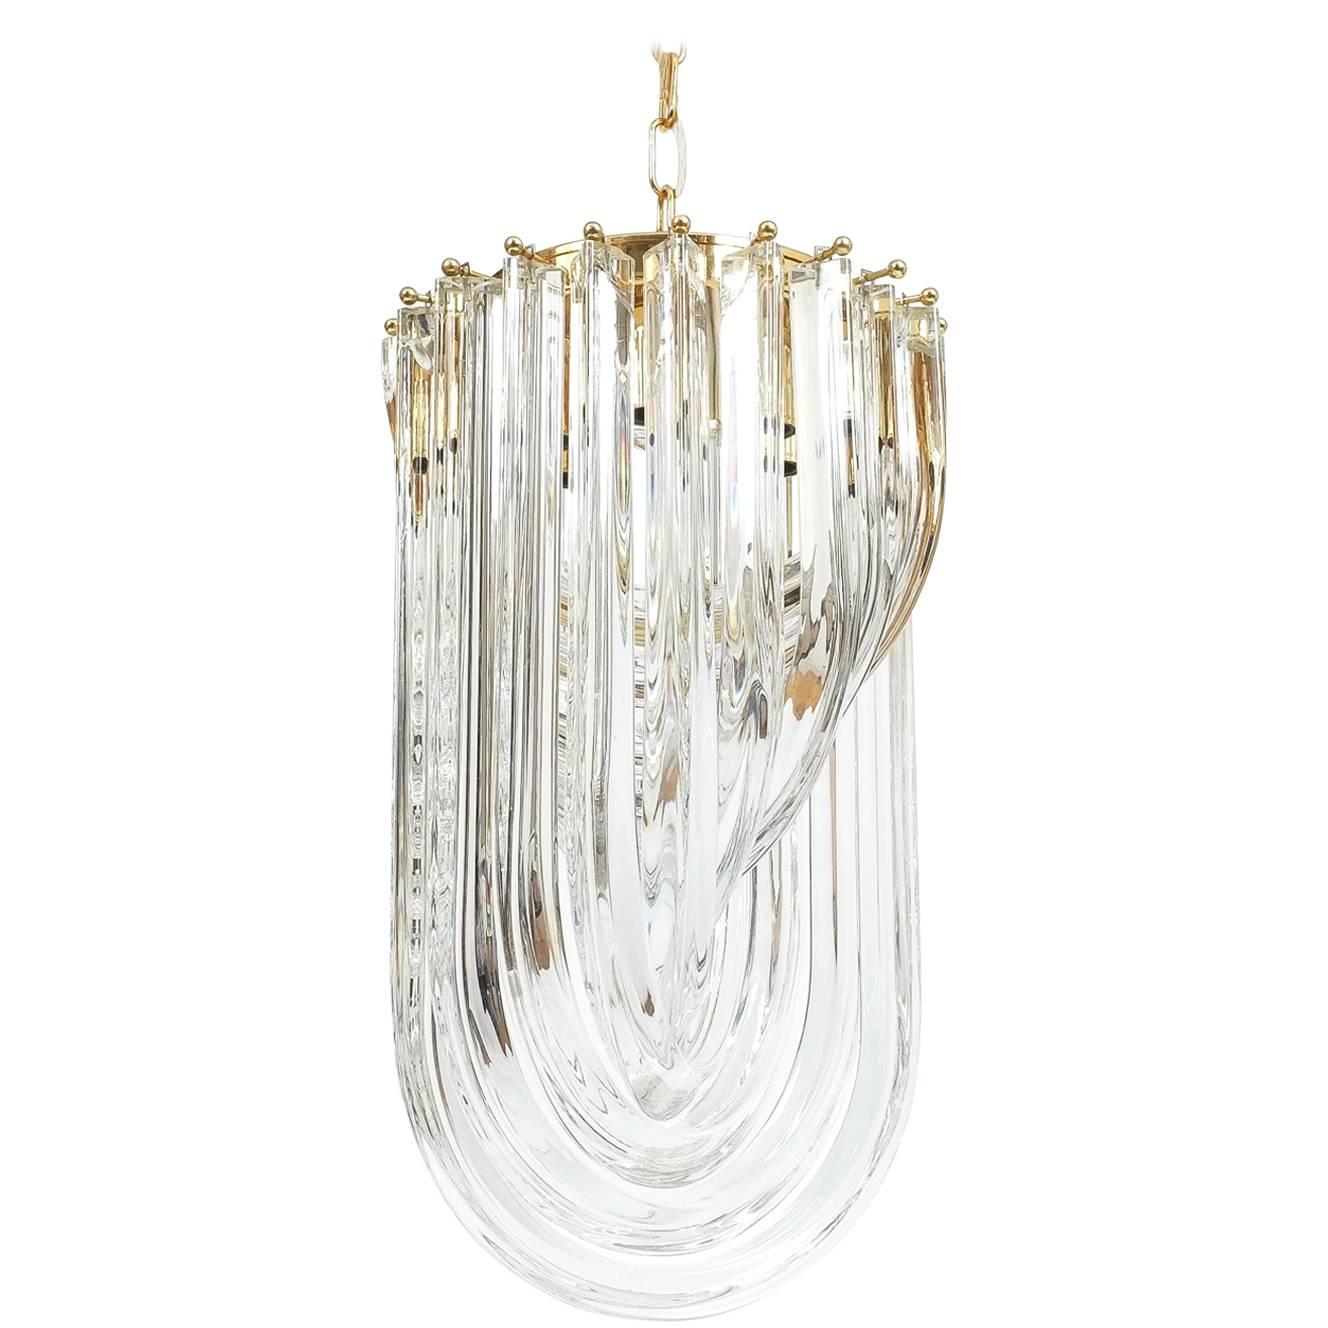 One of Three Venini Curved Crystal Glass Gilt Brass Chandelier